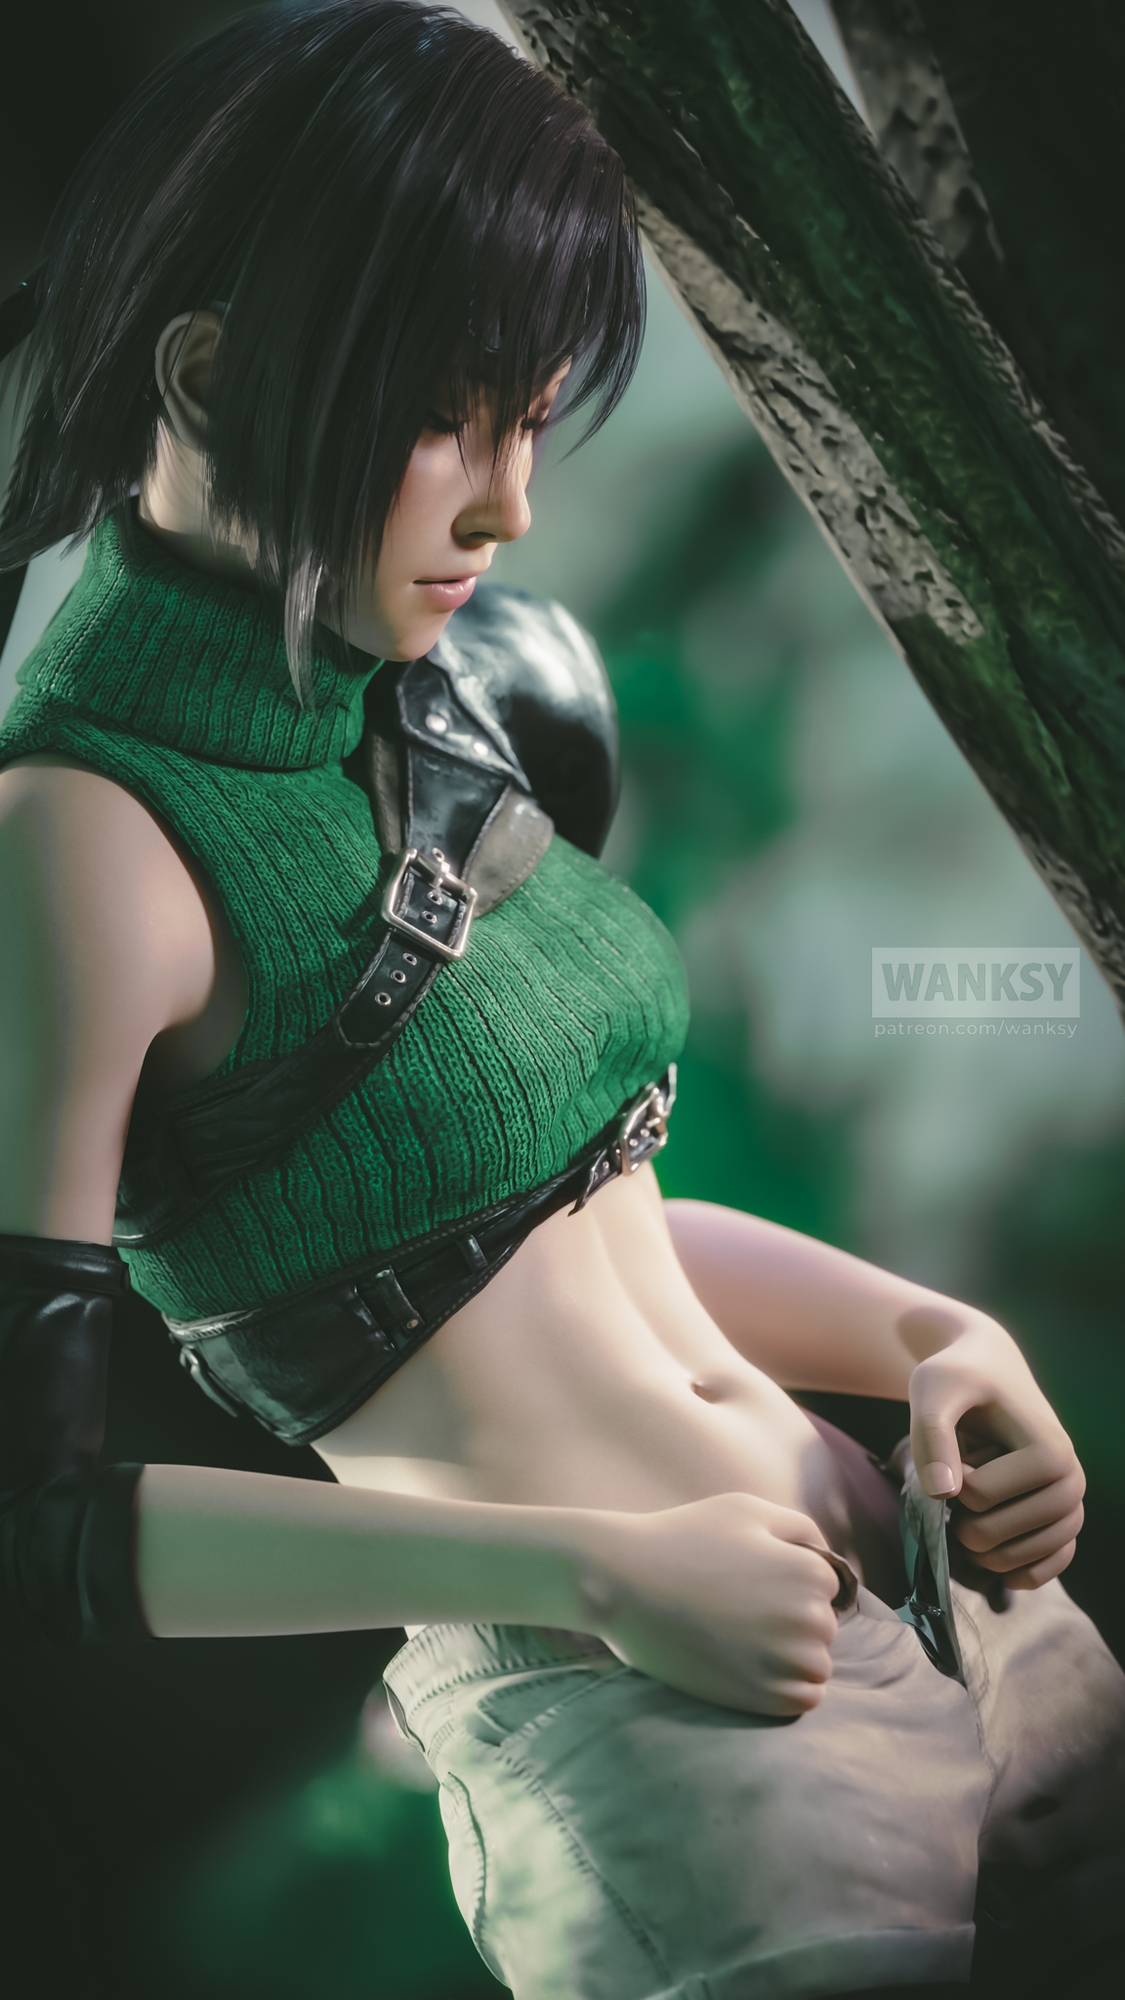 [Poster] Another Yuffie pinup That tummy is yummy Yuffie Kisaragi Final Fantasy 3d Girl